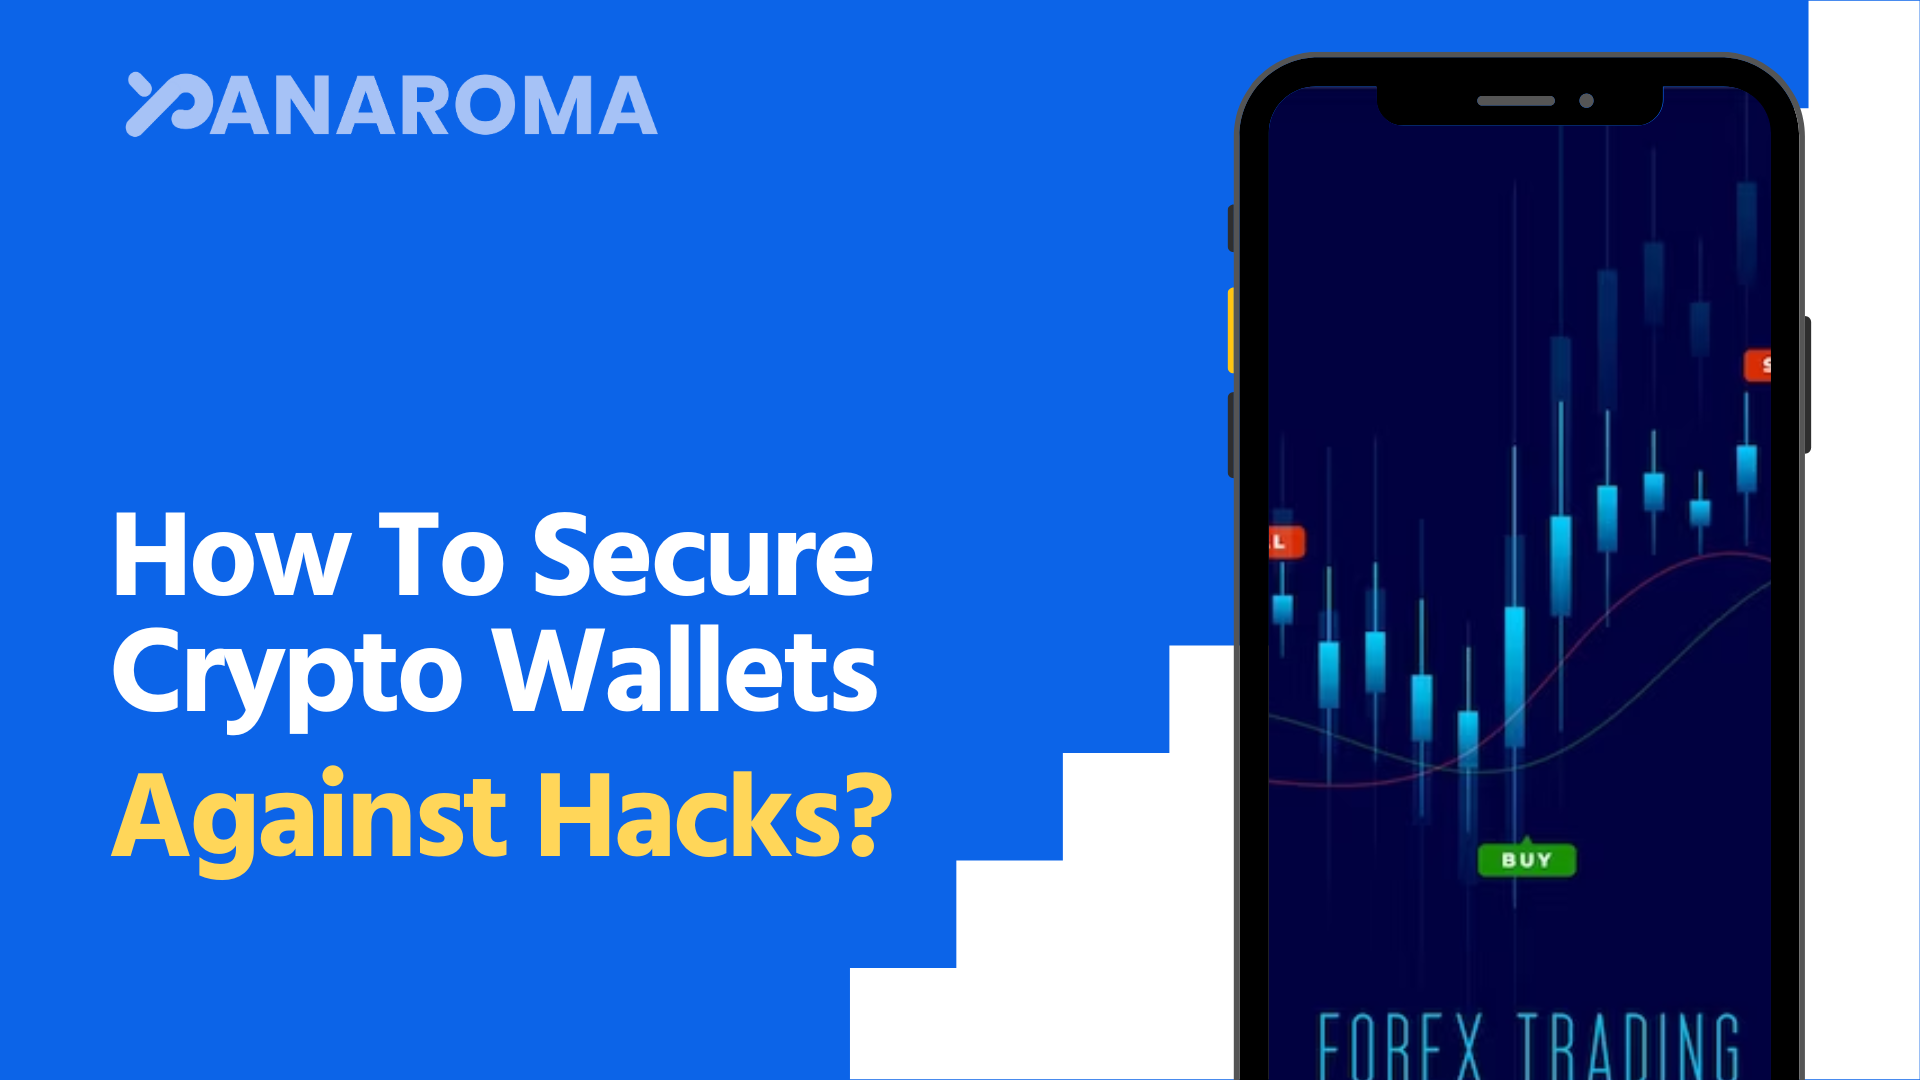 How To Secure Crypto Wallets Against Hacks?